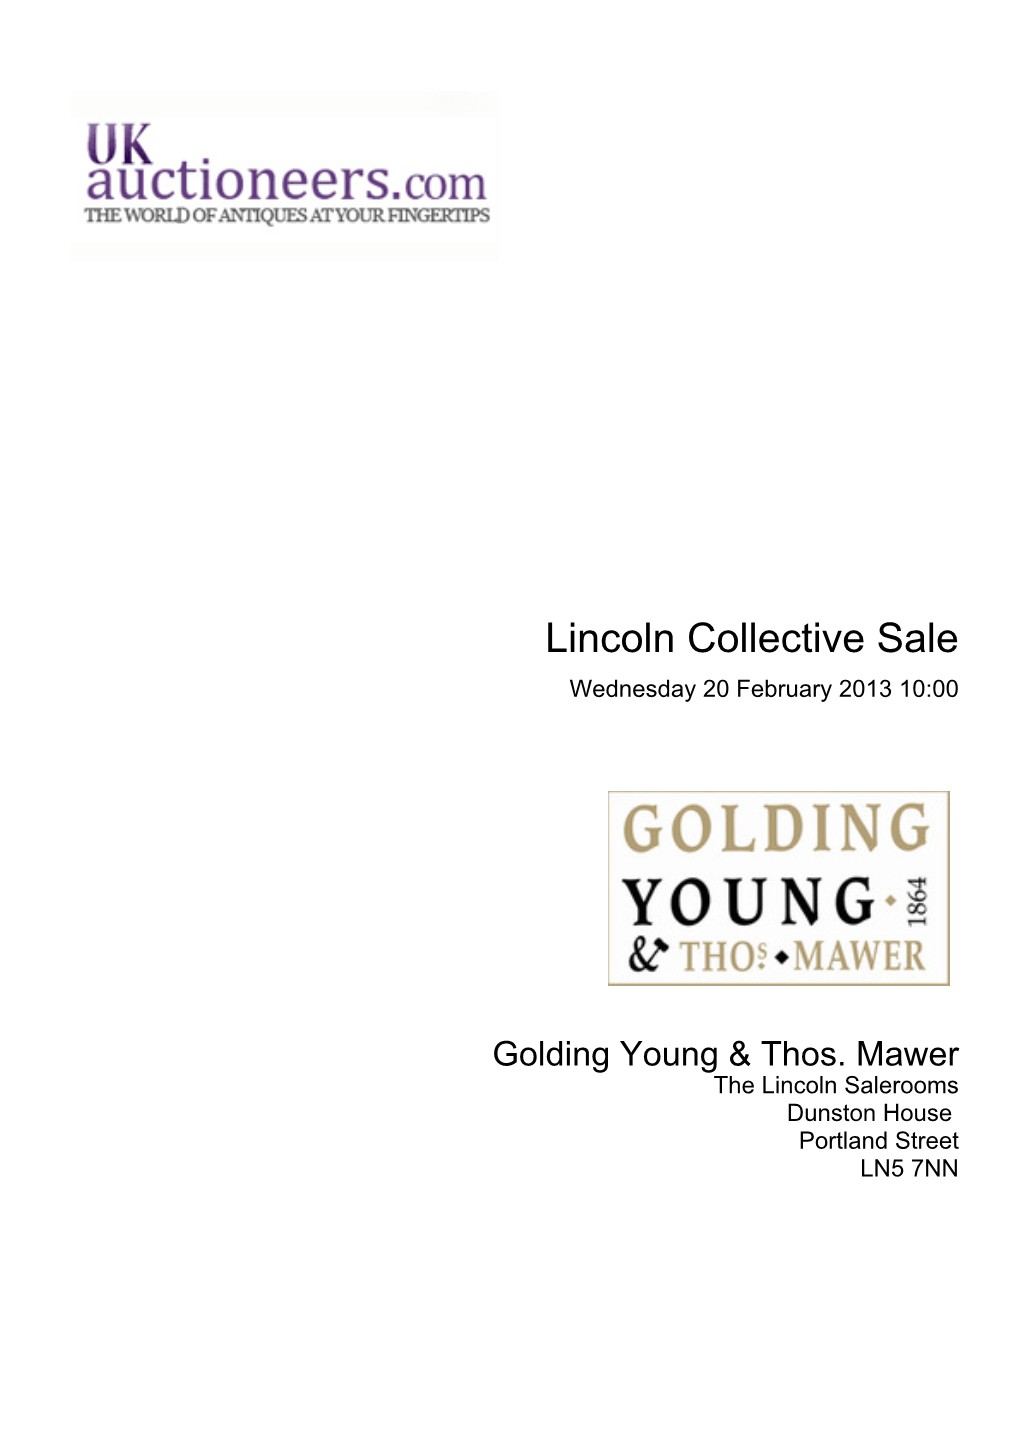 Lincoln Collective Sale Wednesday 20 February 2013 10:00